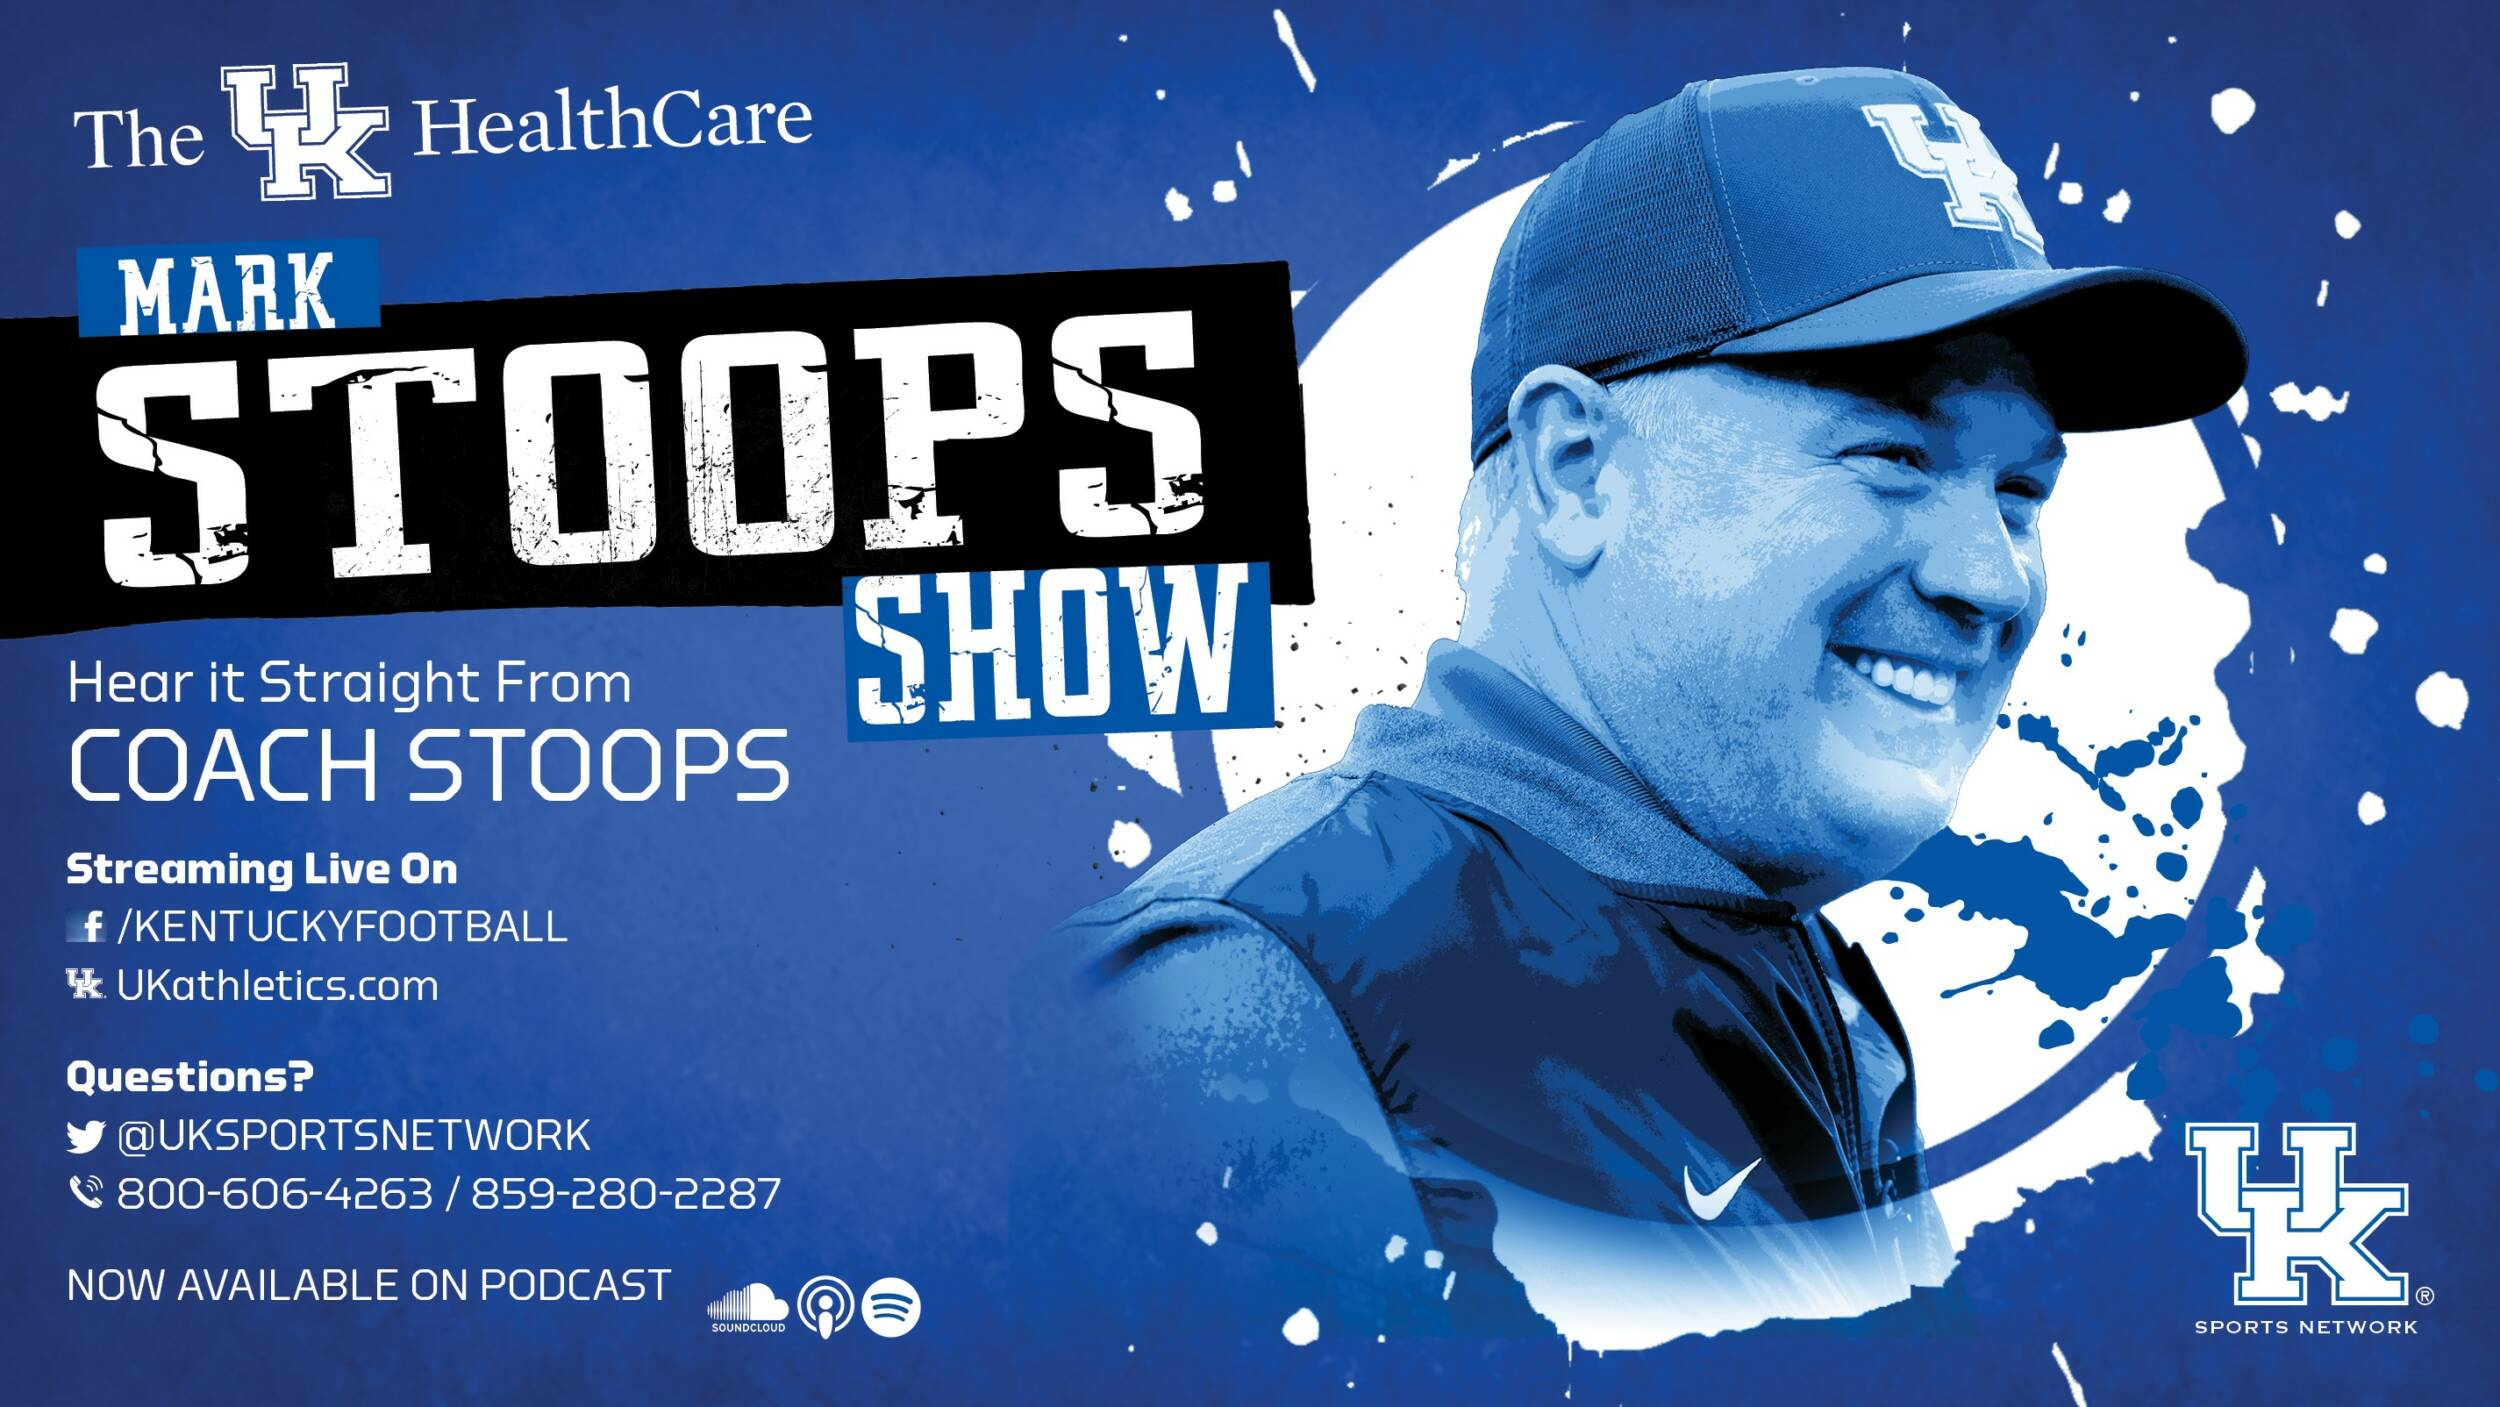 Mark Stoops Show Video Stream Test